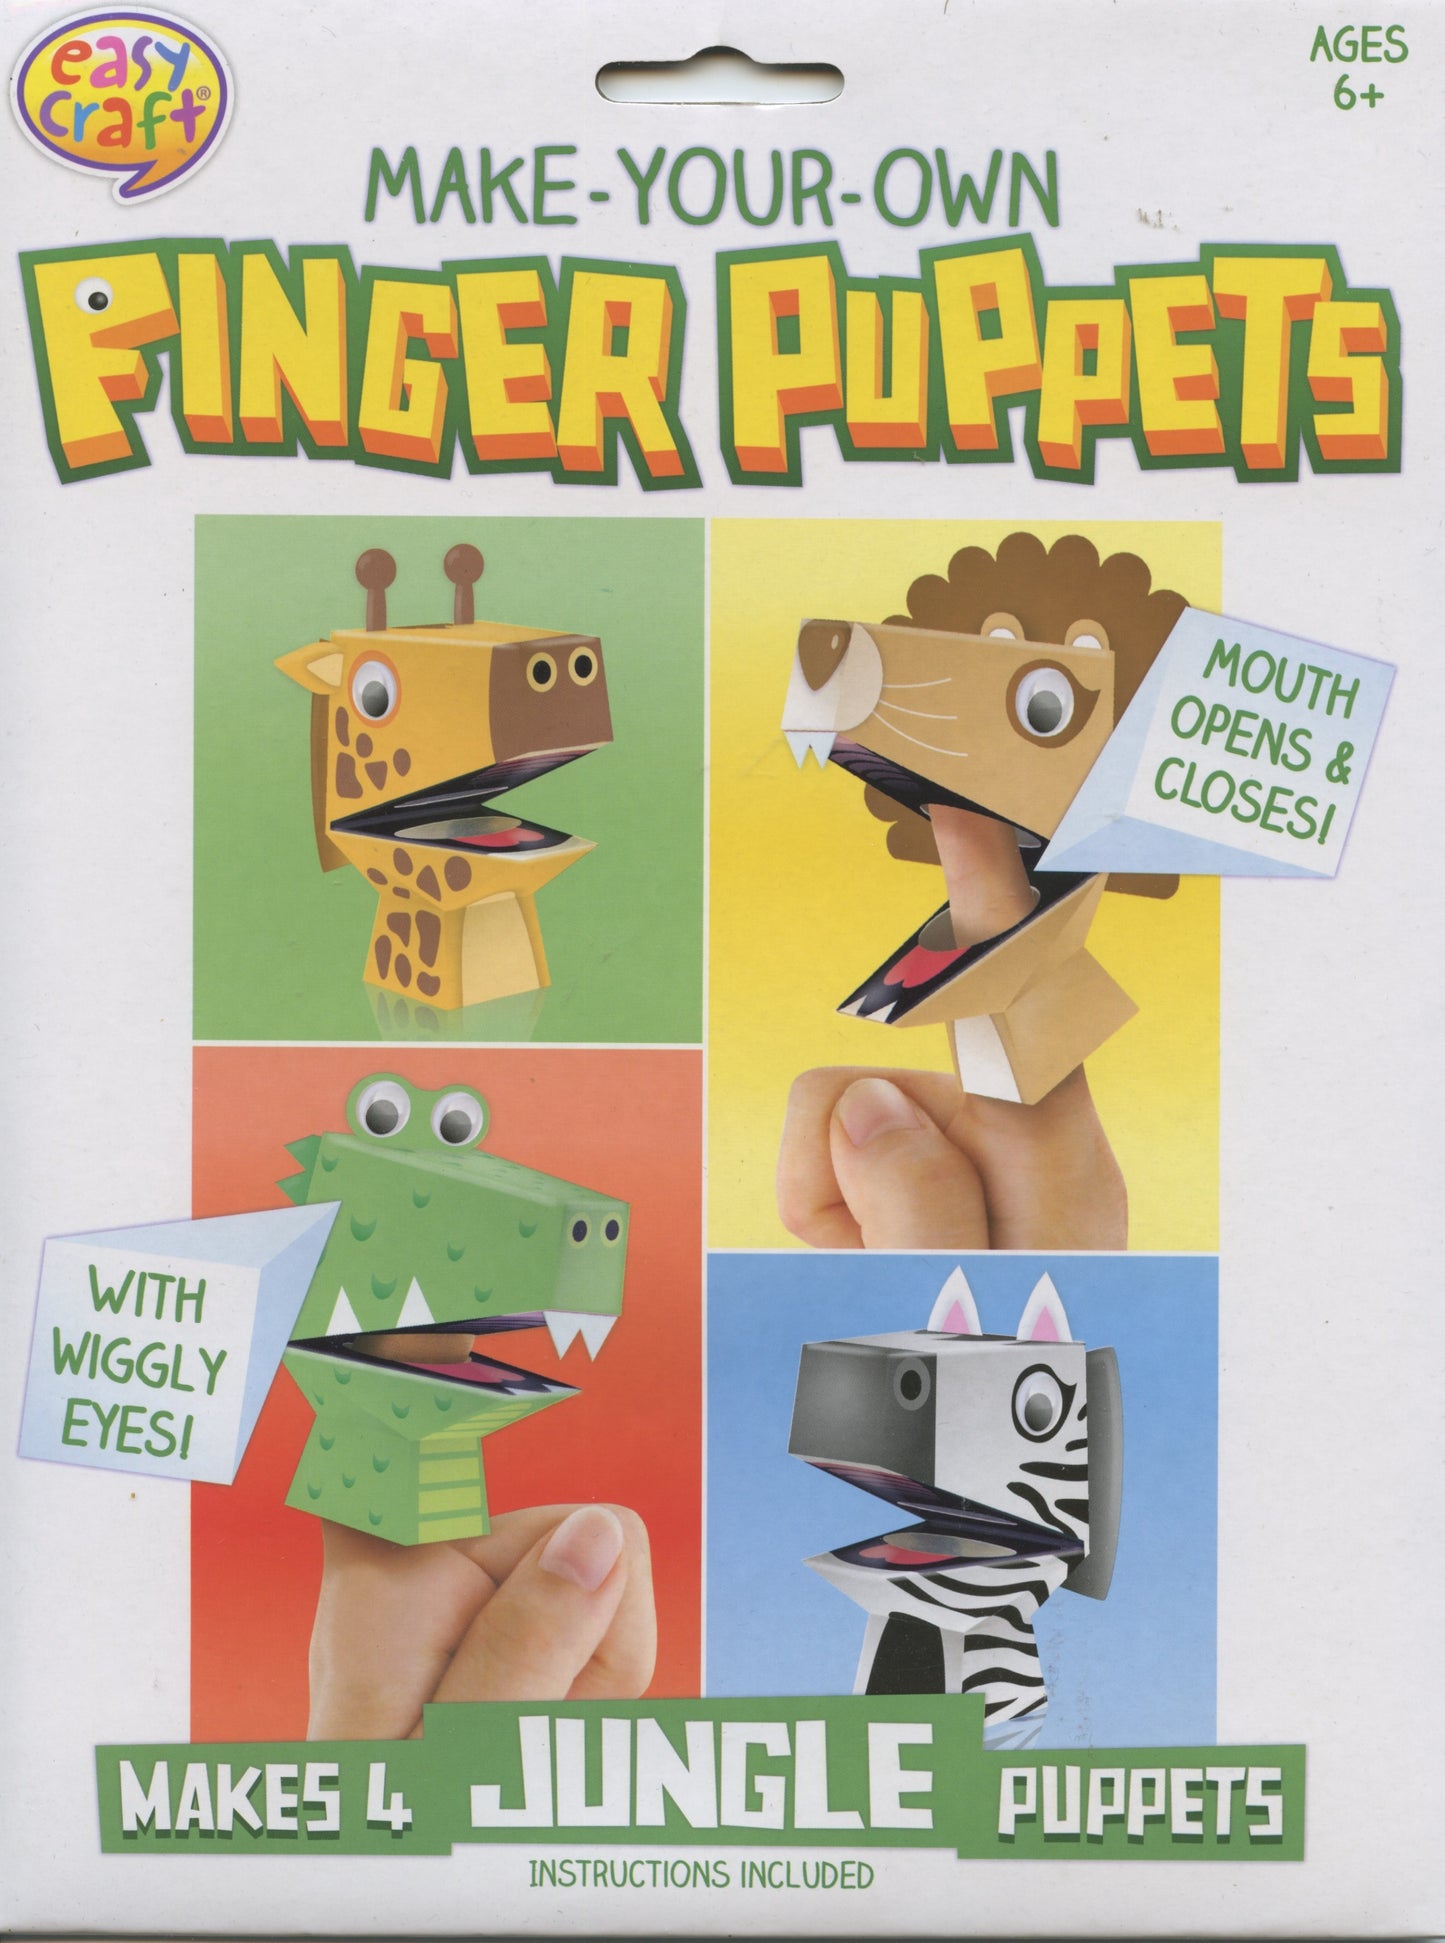 Easy Craft Make Your Own Finger Puppets - Jungle